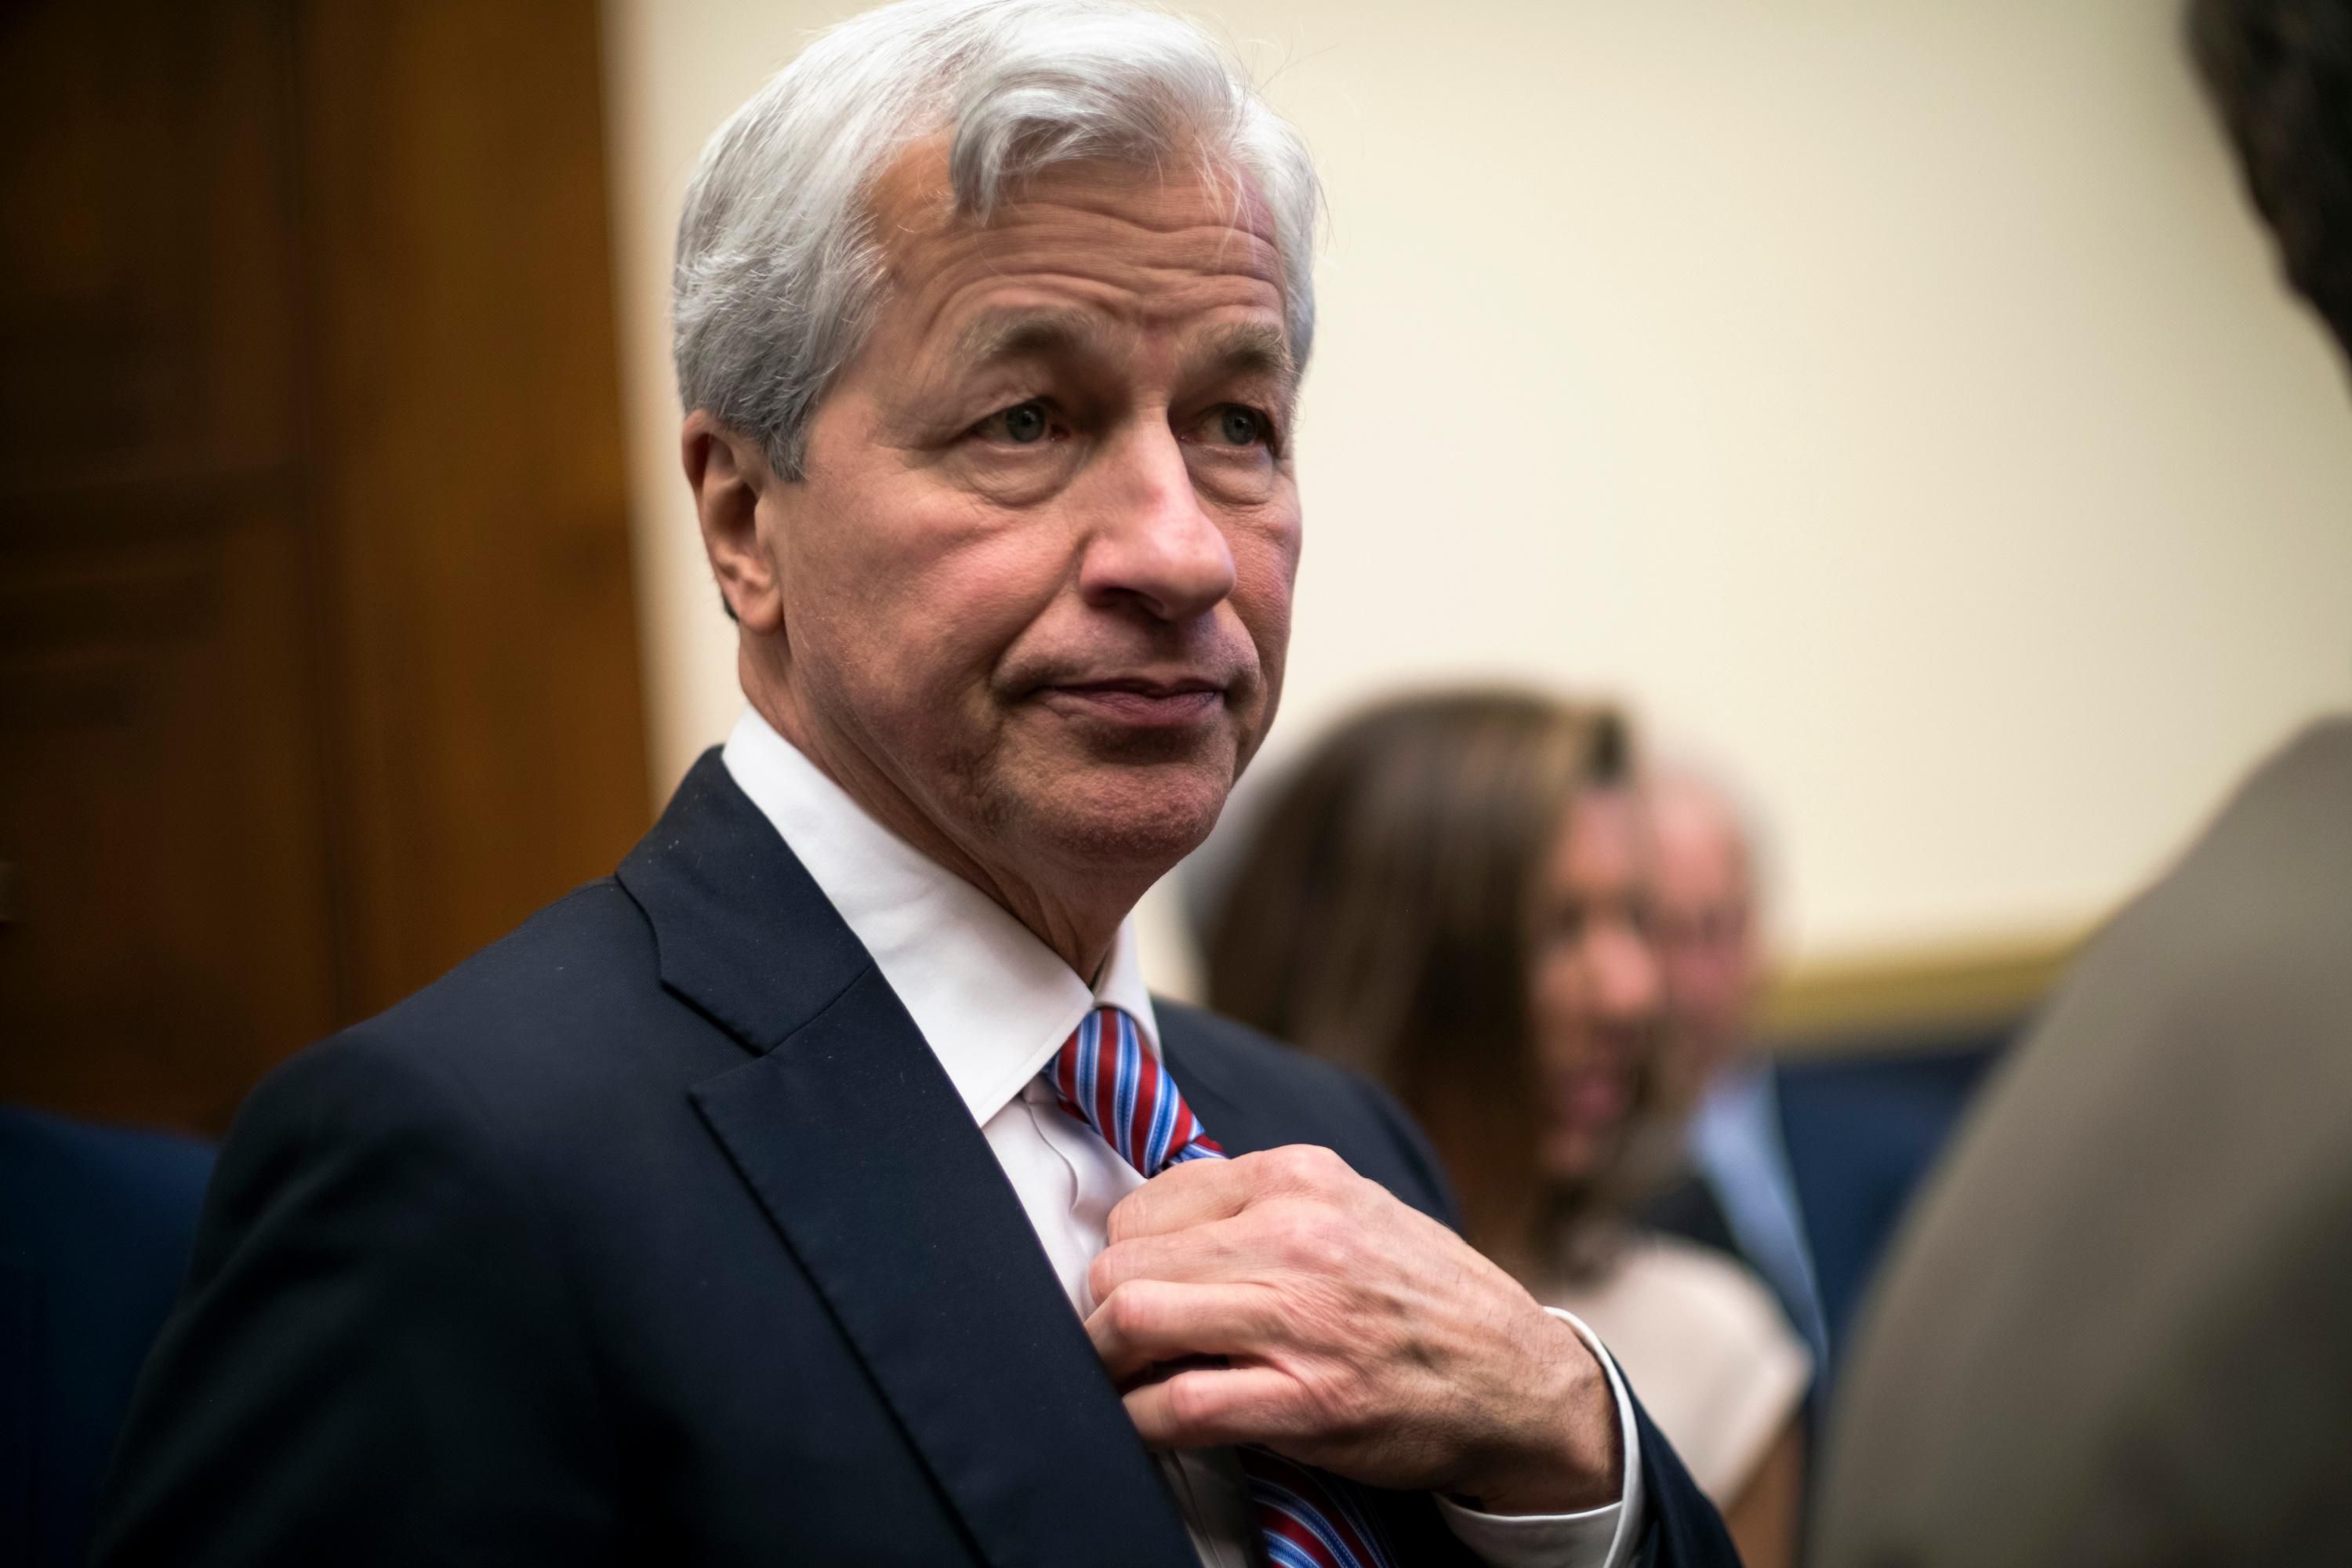 JPMorgan Chase CEO Jamie Dimon attends a hearing